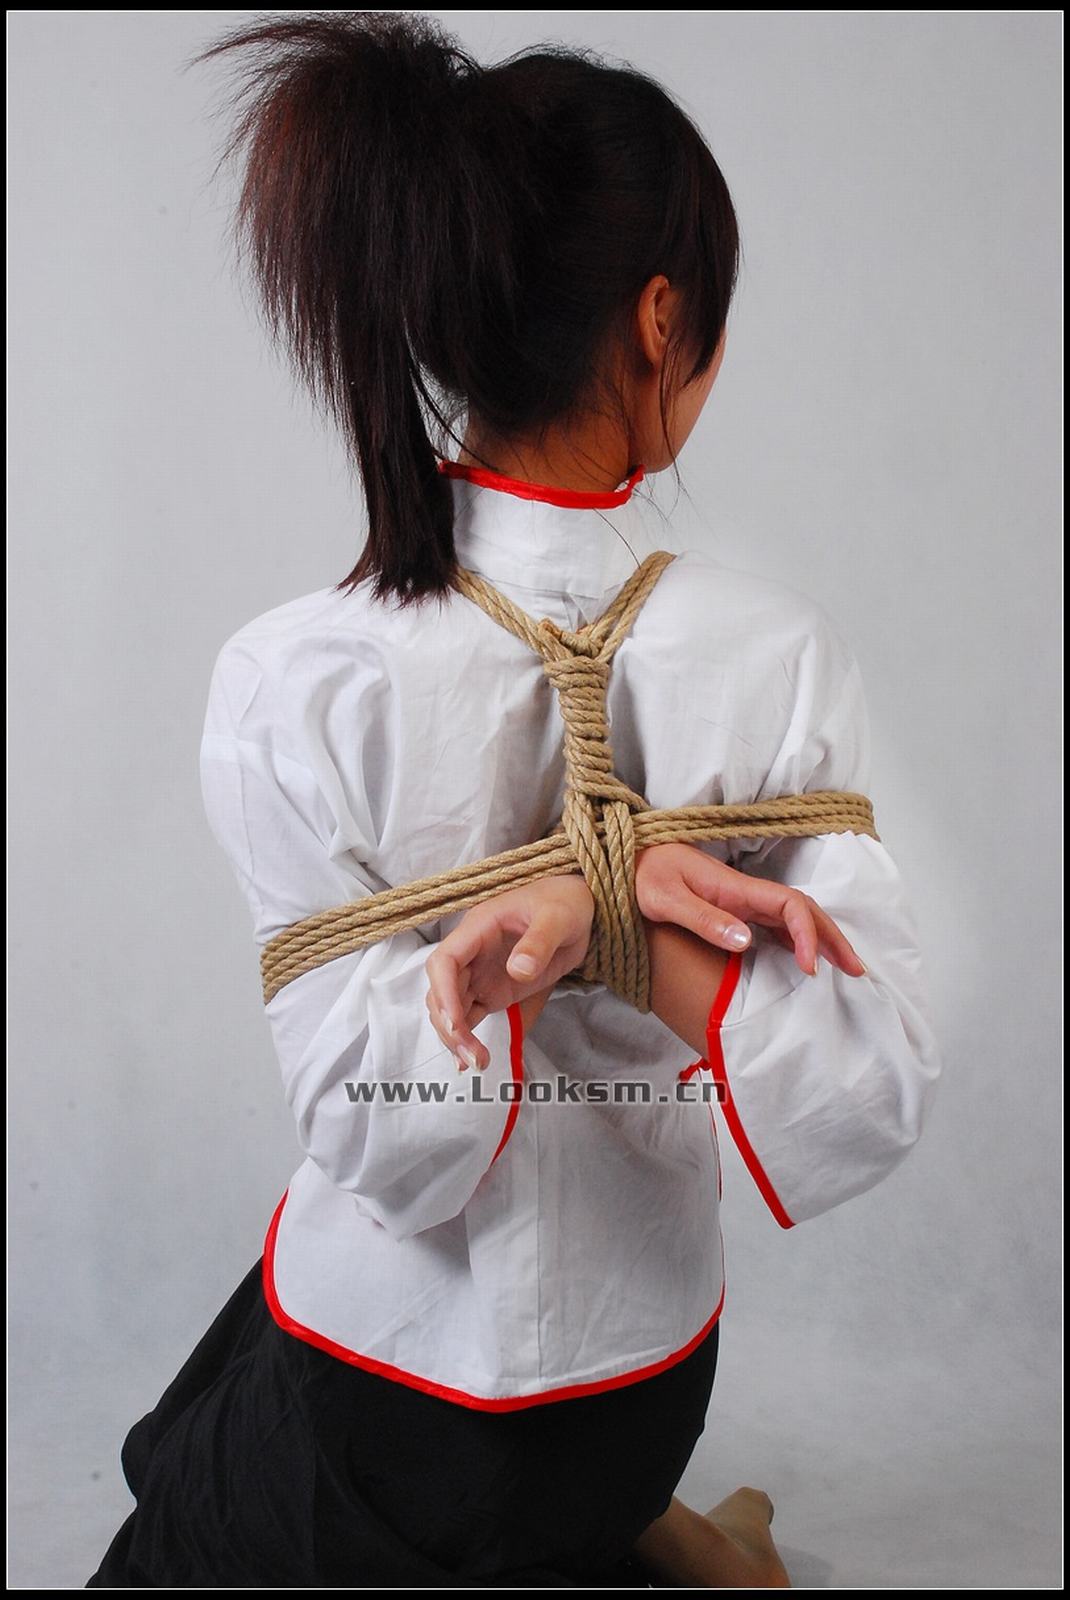 Chinese Rope Model 309